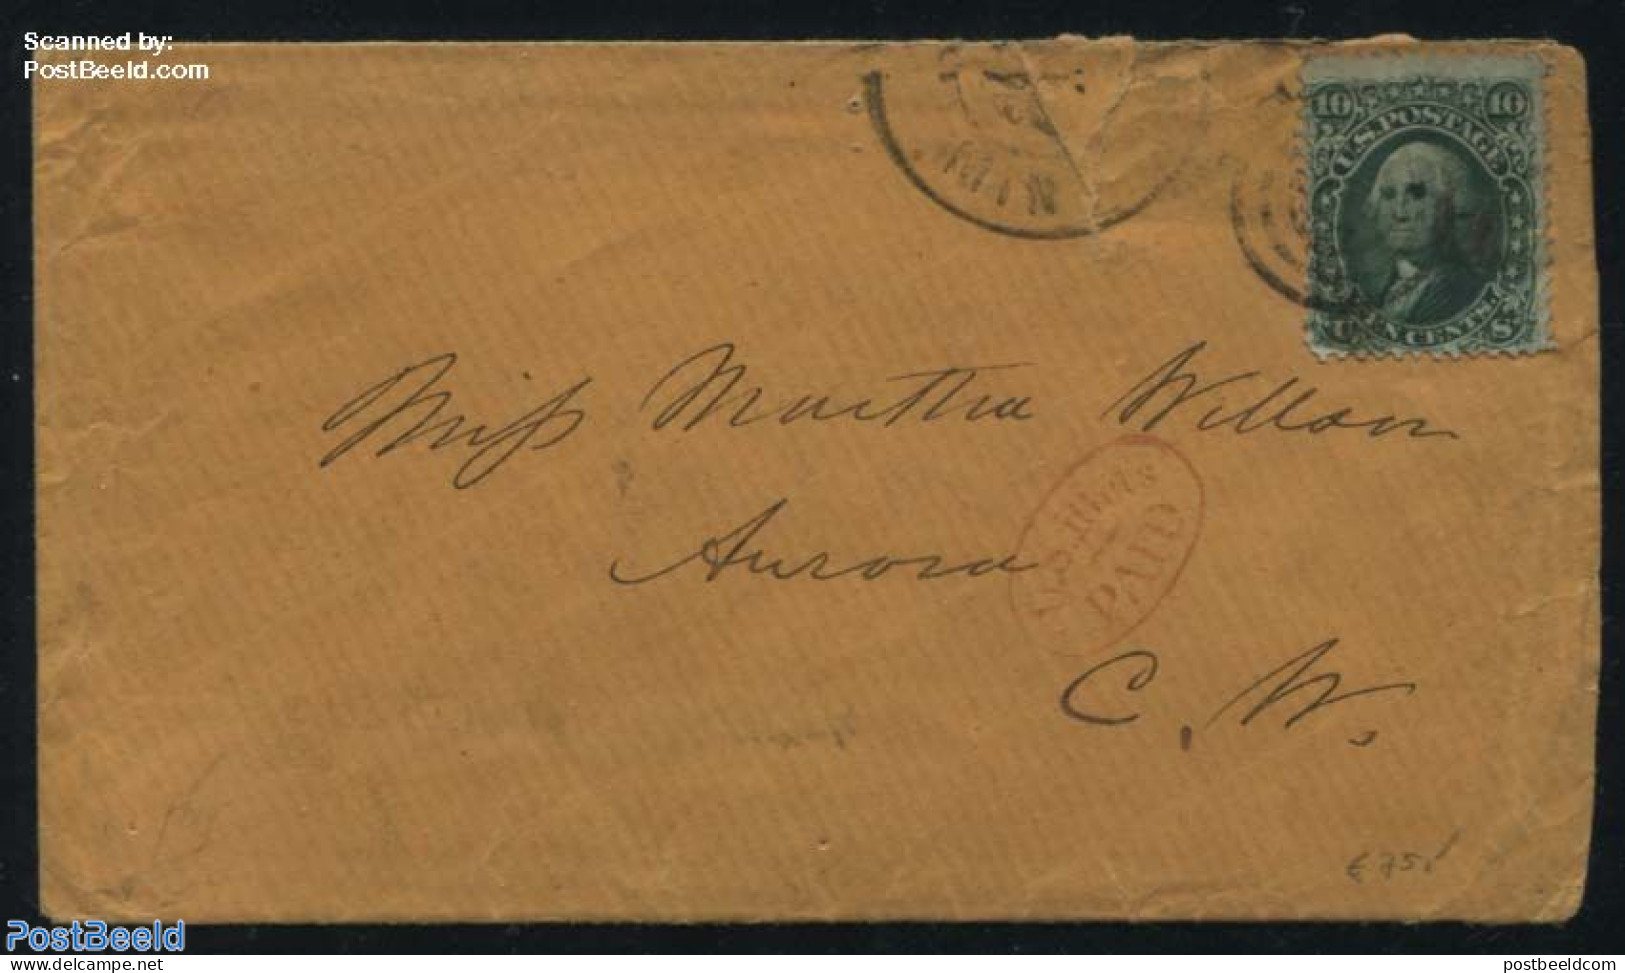 United States Of America 1864 Letter To Aurora With 10c Green, Postal History - Storia Postale